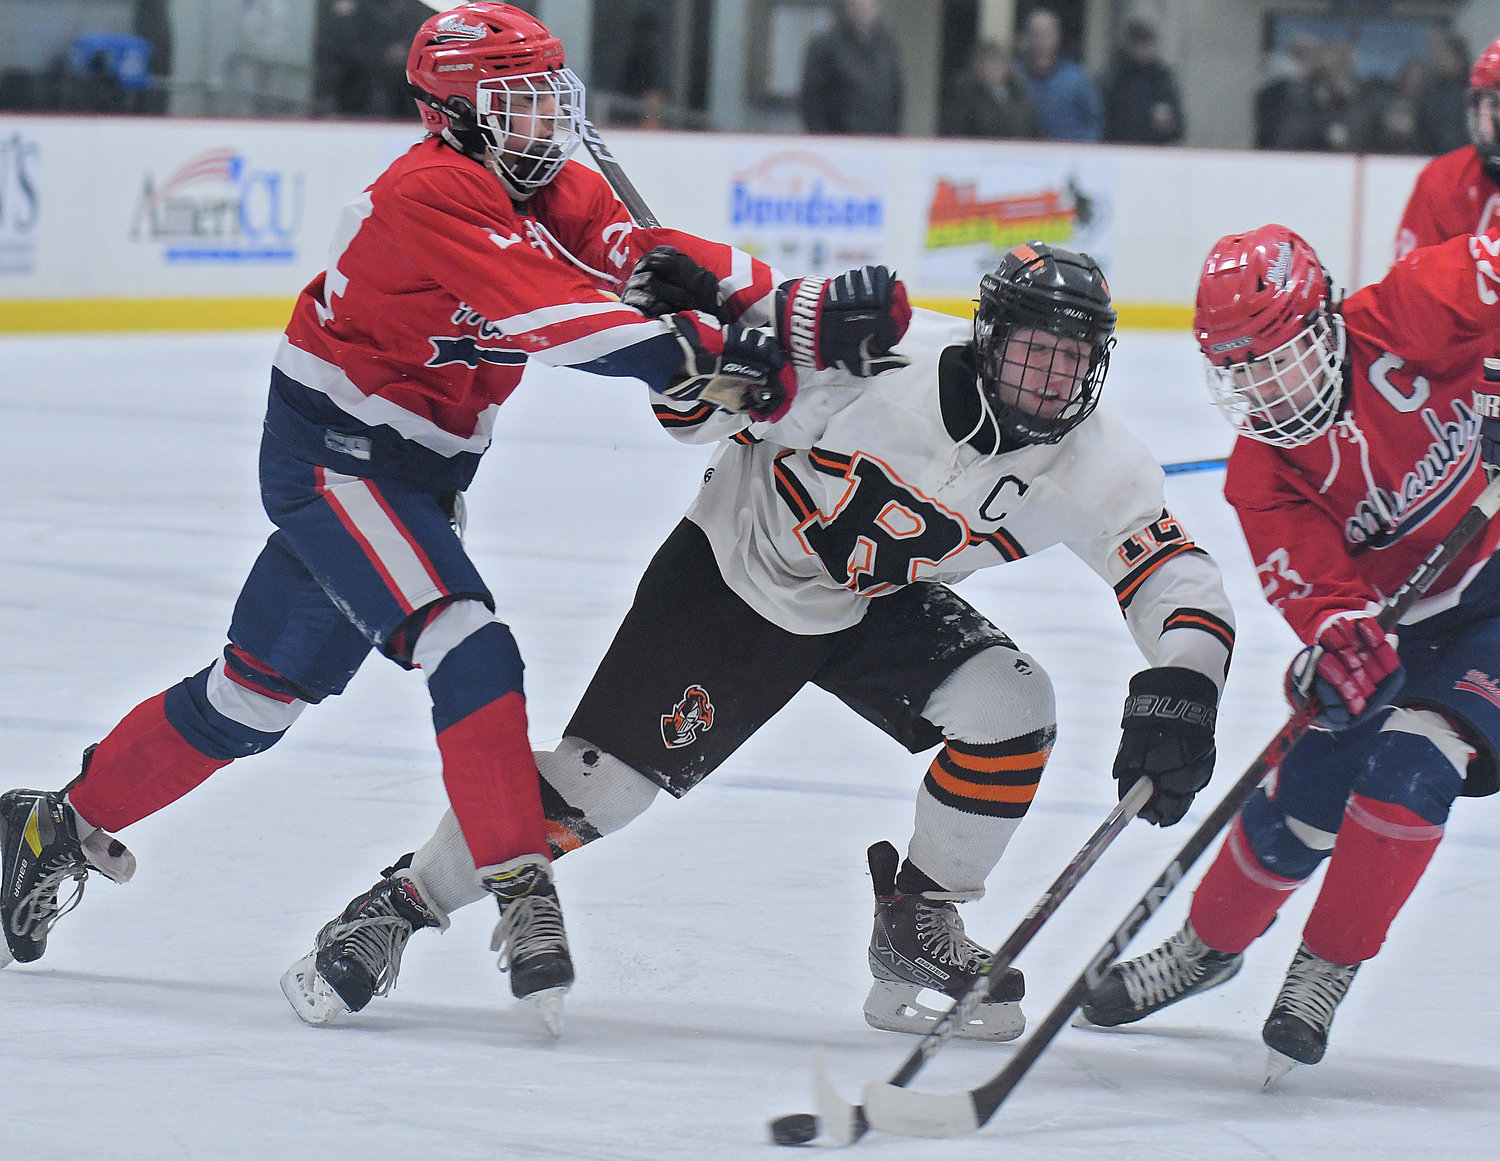 Jake Premo of Rome Free Academy splits the defense of Niskayuna's Luke Allen, left, and Peter Hans during the first period at Kennedy Arena Friday afternoon. RFA won 10-0.